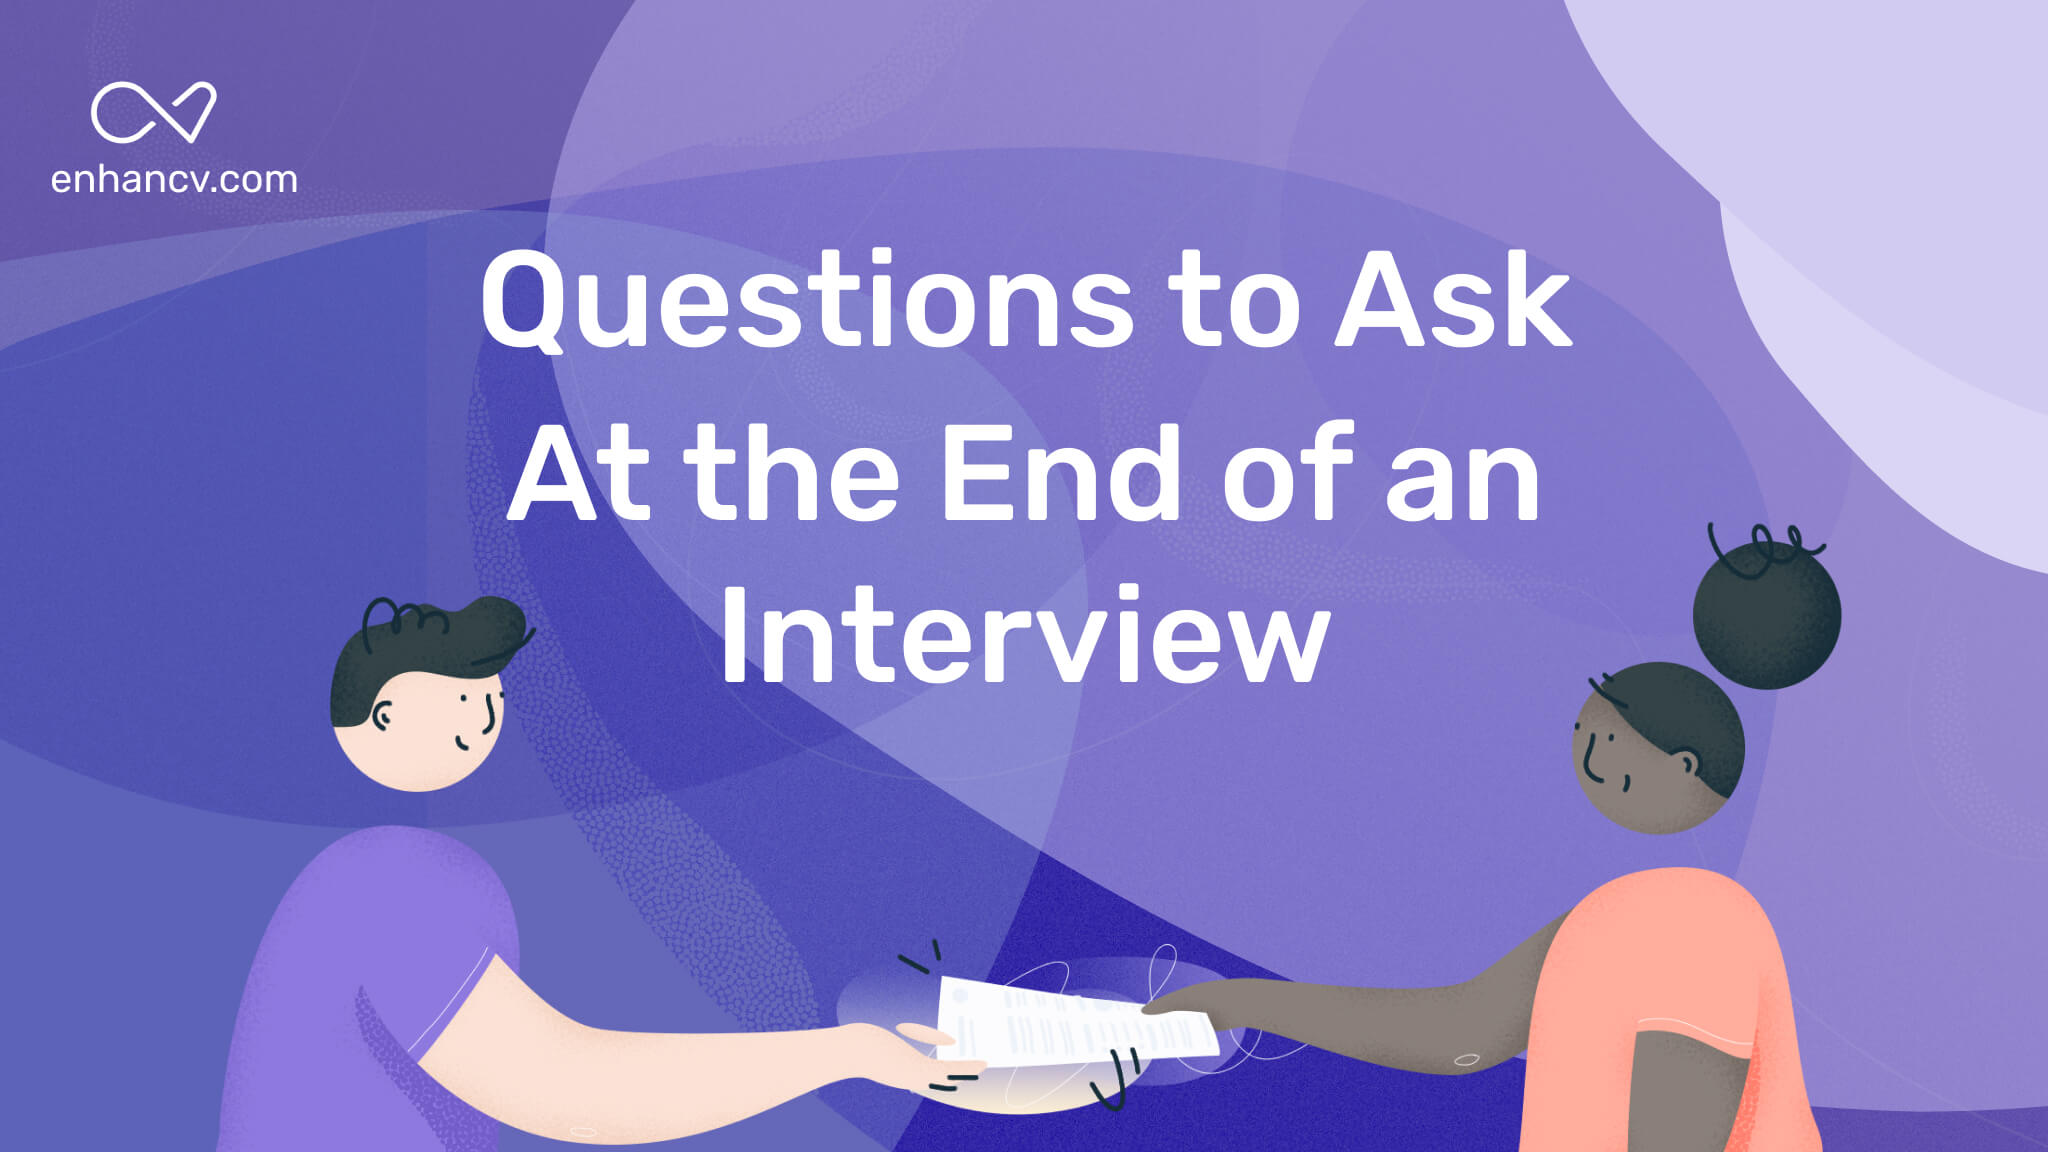 The Top 15 Questions to Ask at the End of an Interview